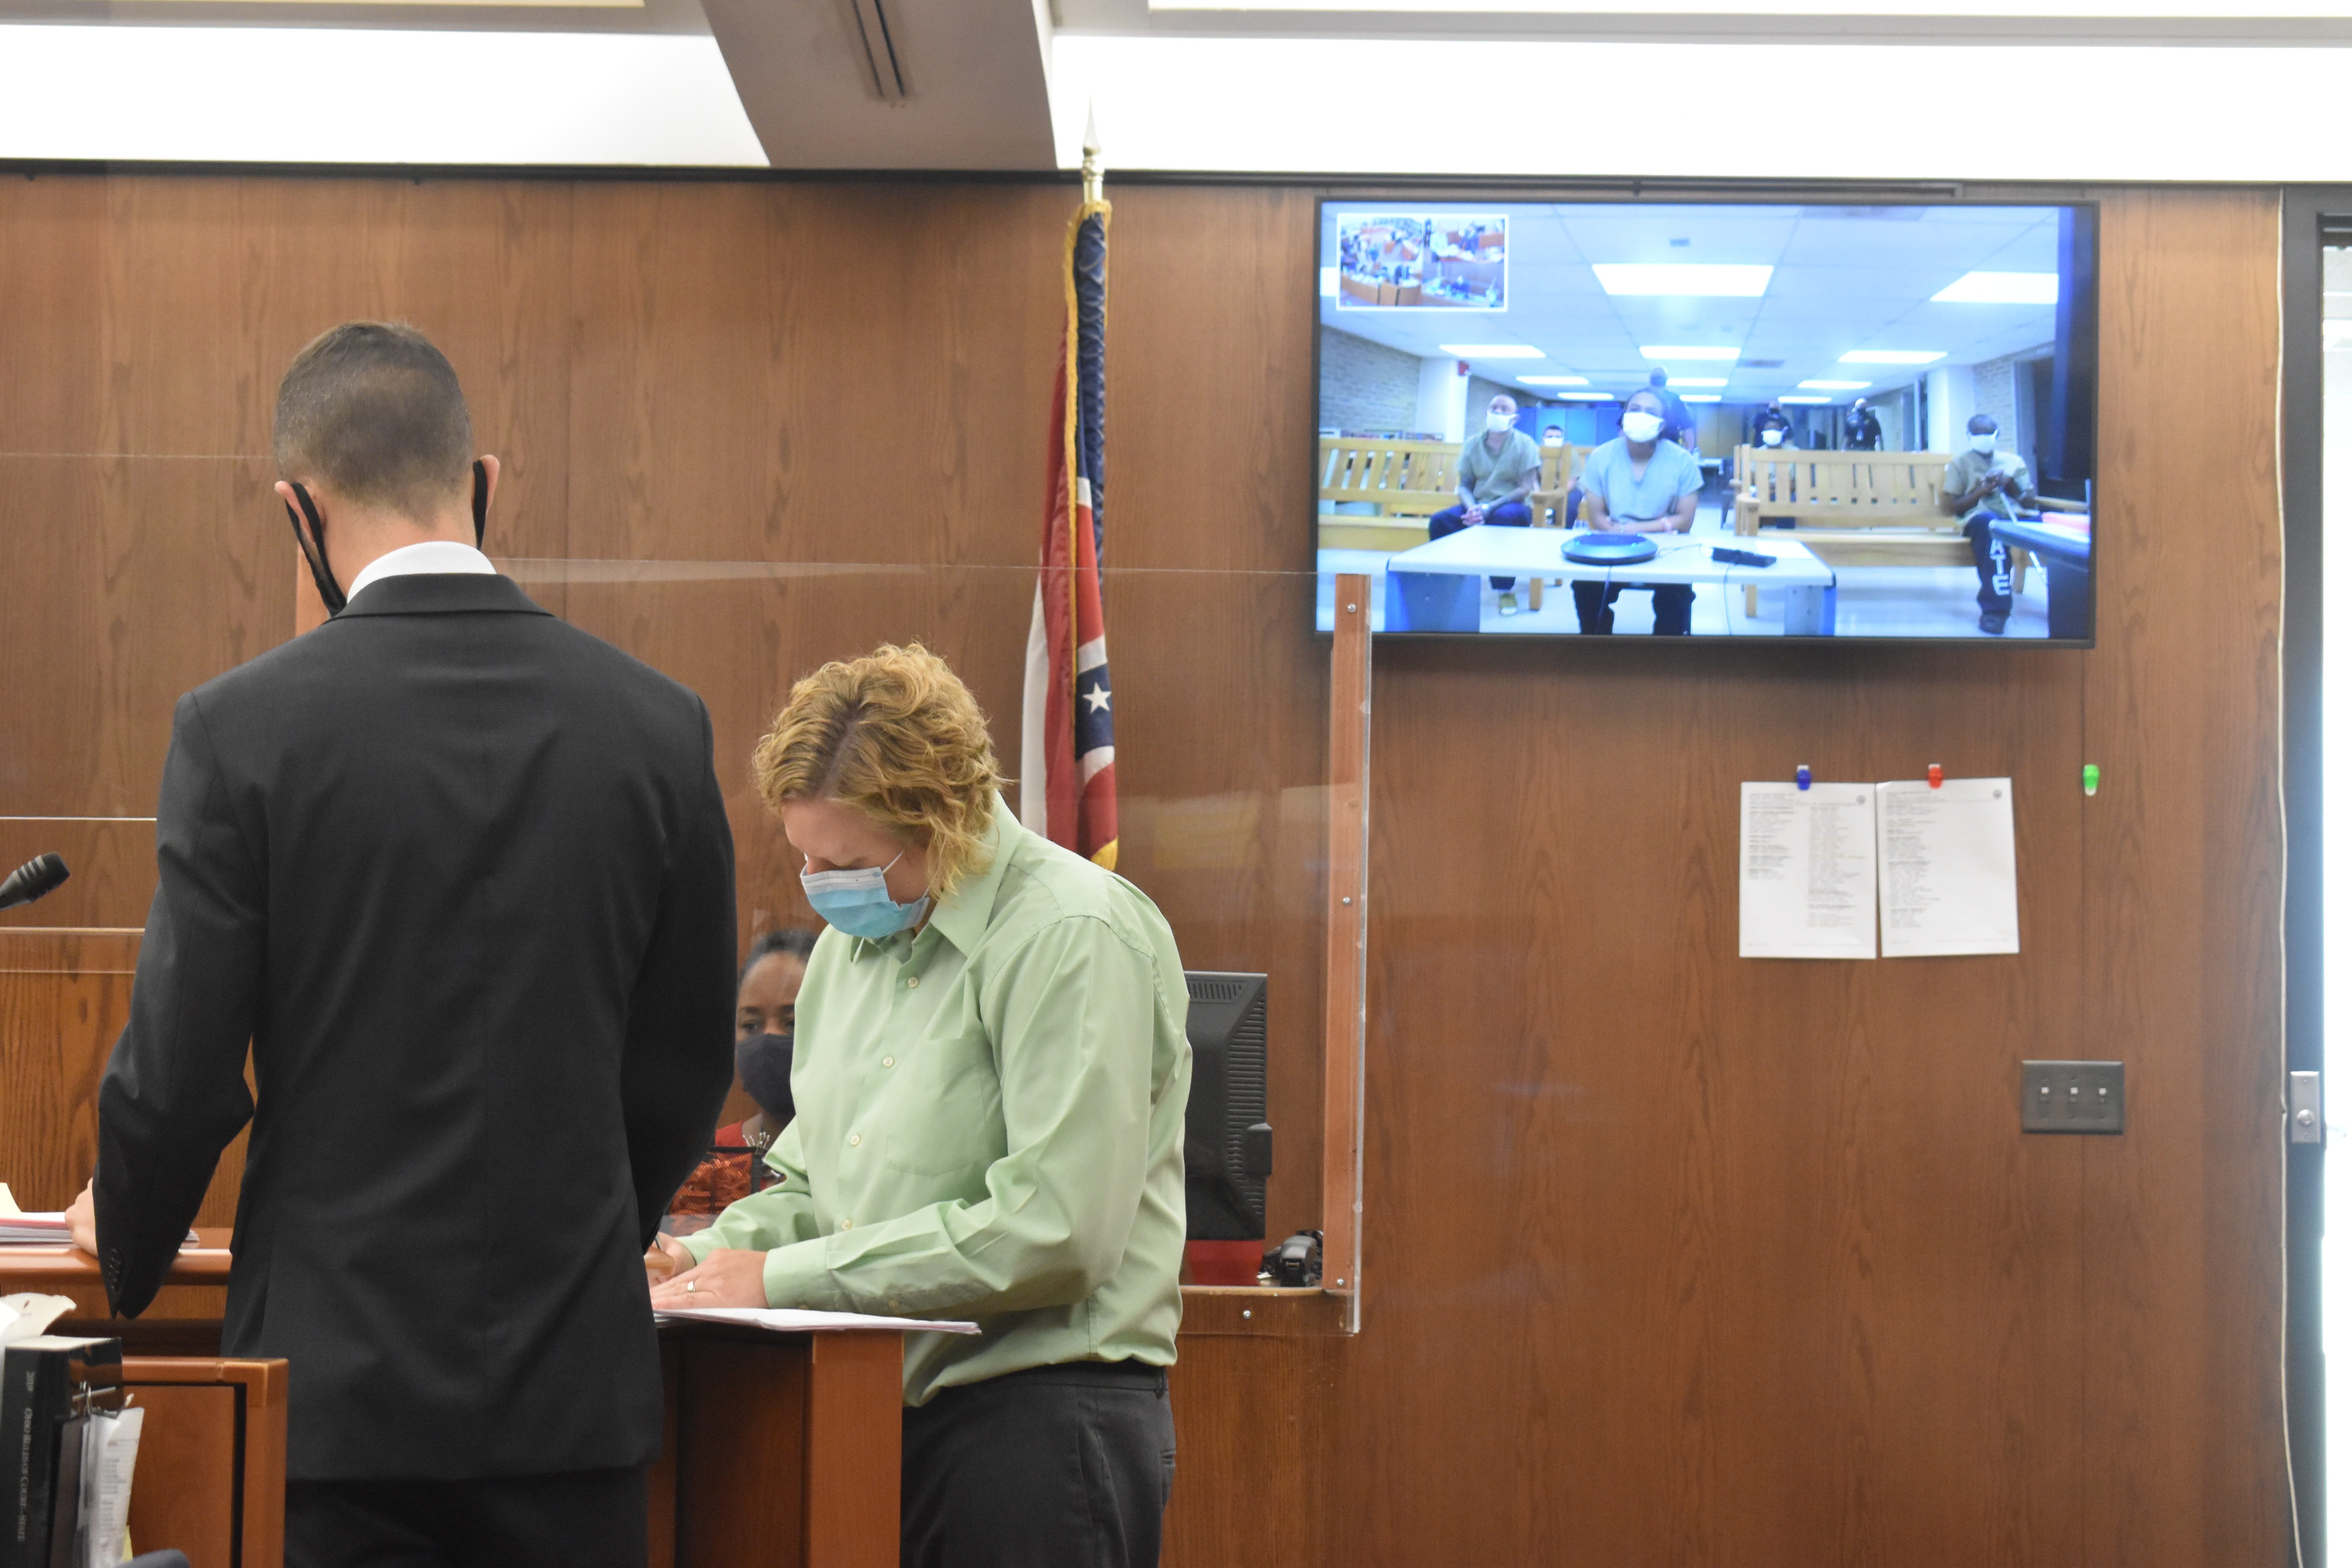 Mitchell did not enter plea to murder of Chase Meola